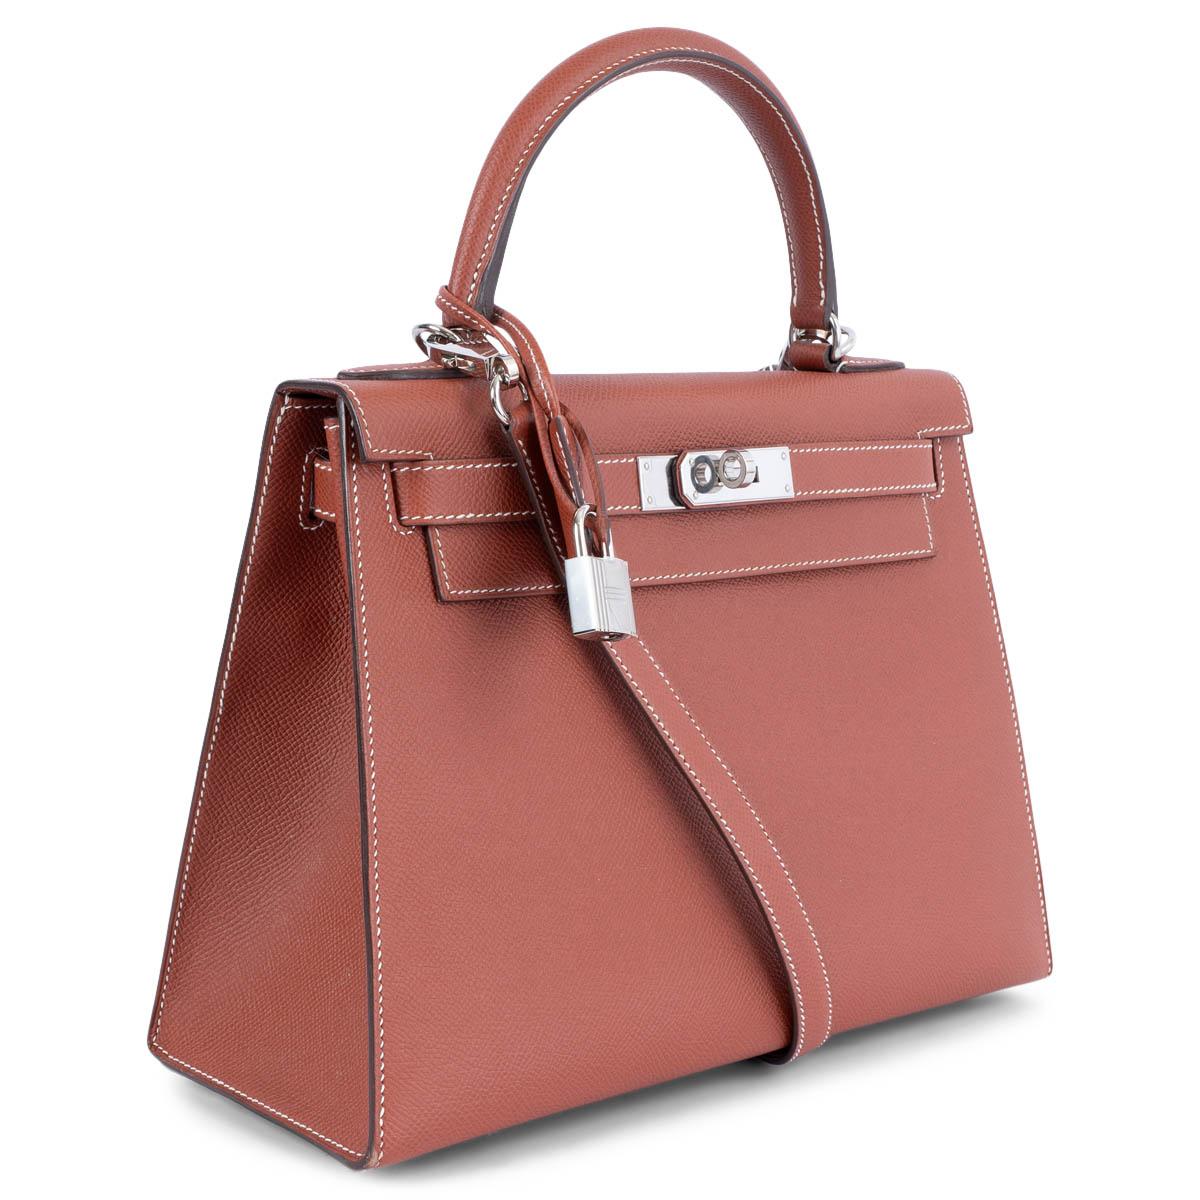 100% authentic Hermès Kelly 28 Sellier bag in Sienne (brick) Veau Epsom featuring contrasting white stitching and palladium hardware. Lined in Chevre (goat skin) with an open pocket against the front and a zipper pocket against the bag. Has been